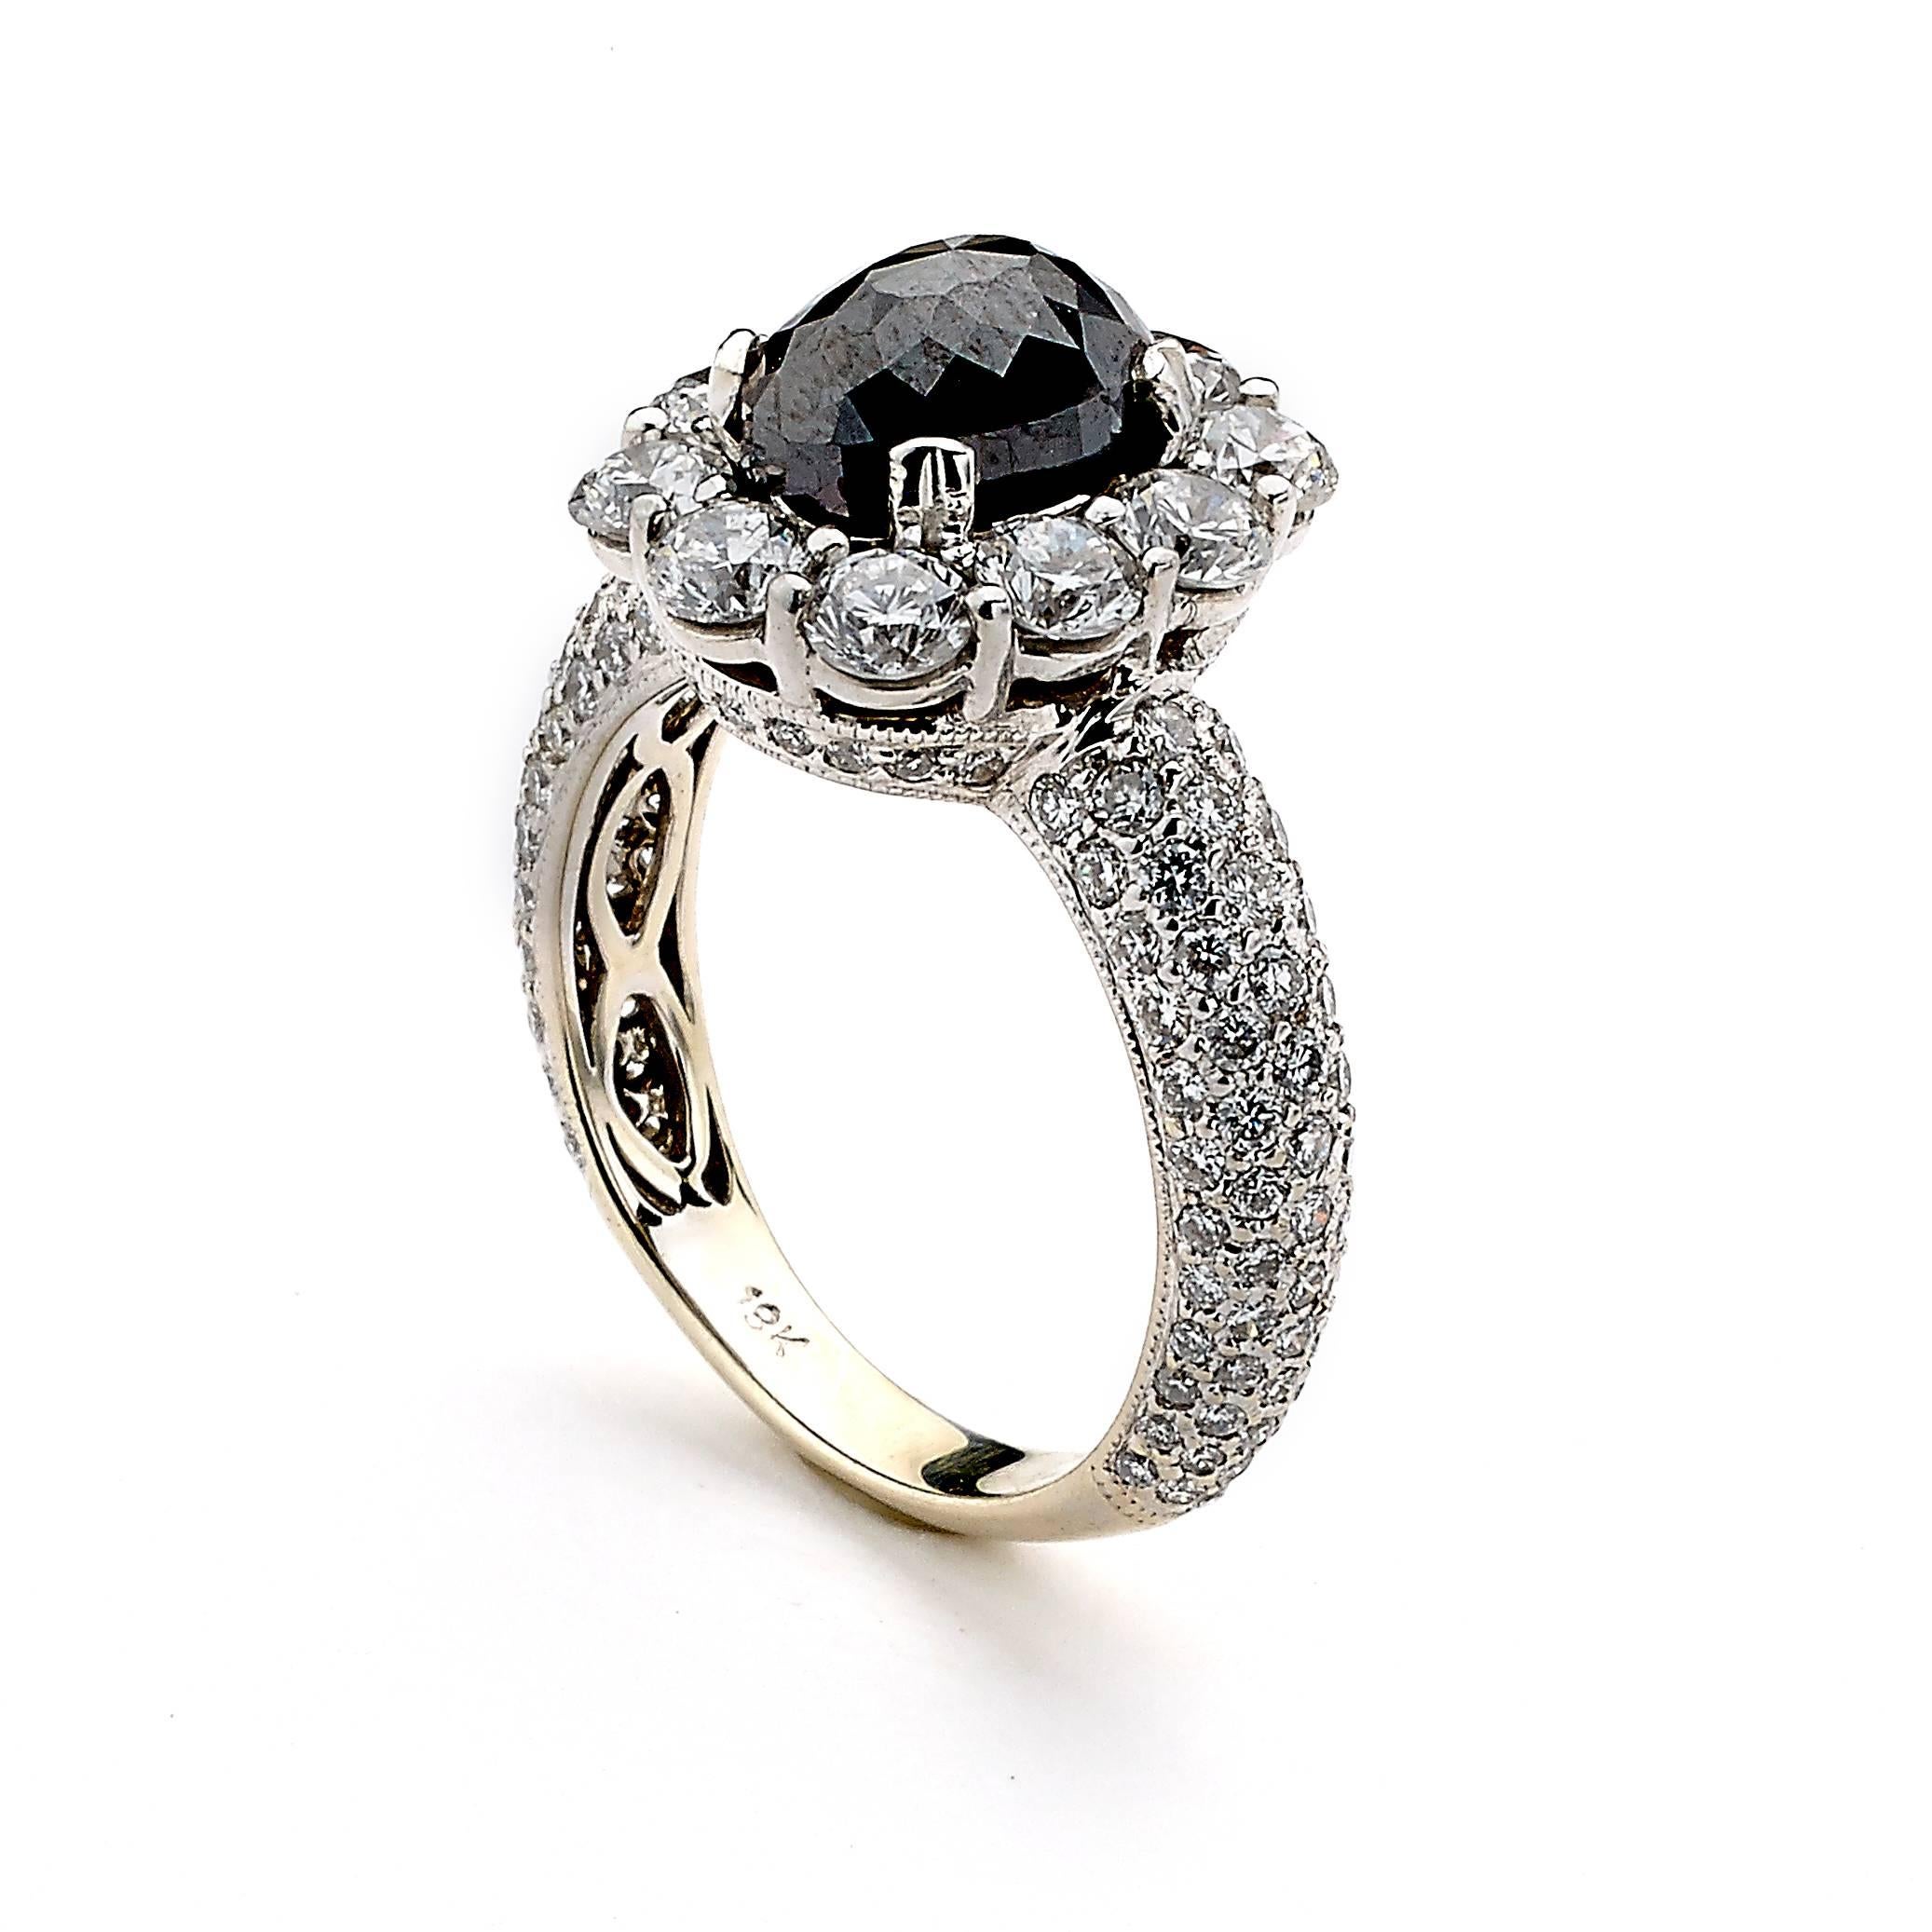 A stunning ring, polished in 18K Gold to add more luxury to the design.
Classic and Elegant, this piece houses a rich black oval Rough Diamond Center surrounded by beautifully matched White Diamonds.
 
Rough Black Diamond Weight: 2.31 cts.
White